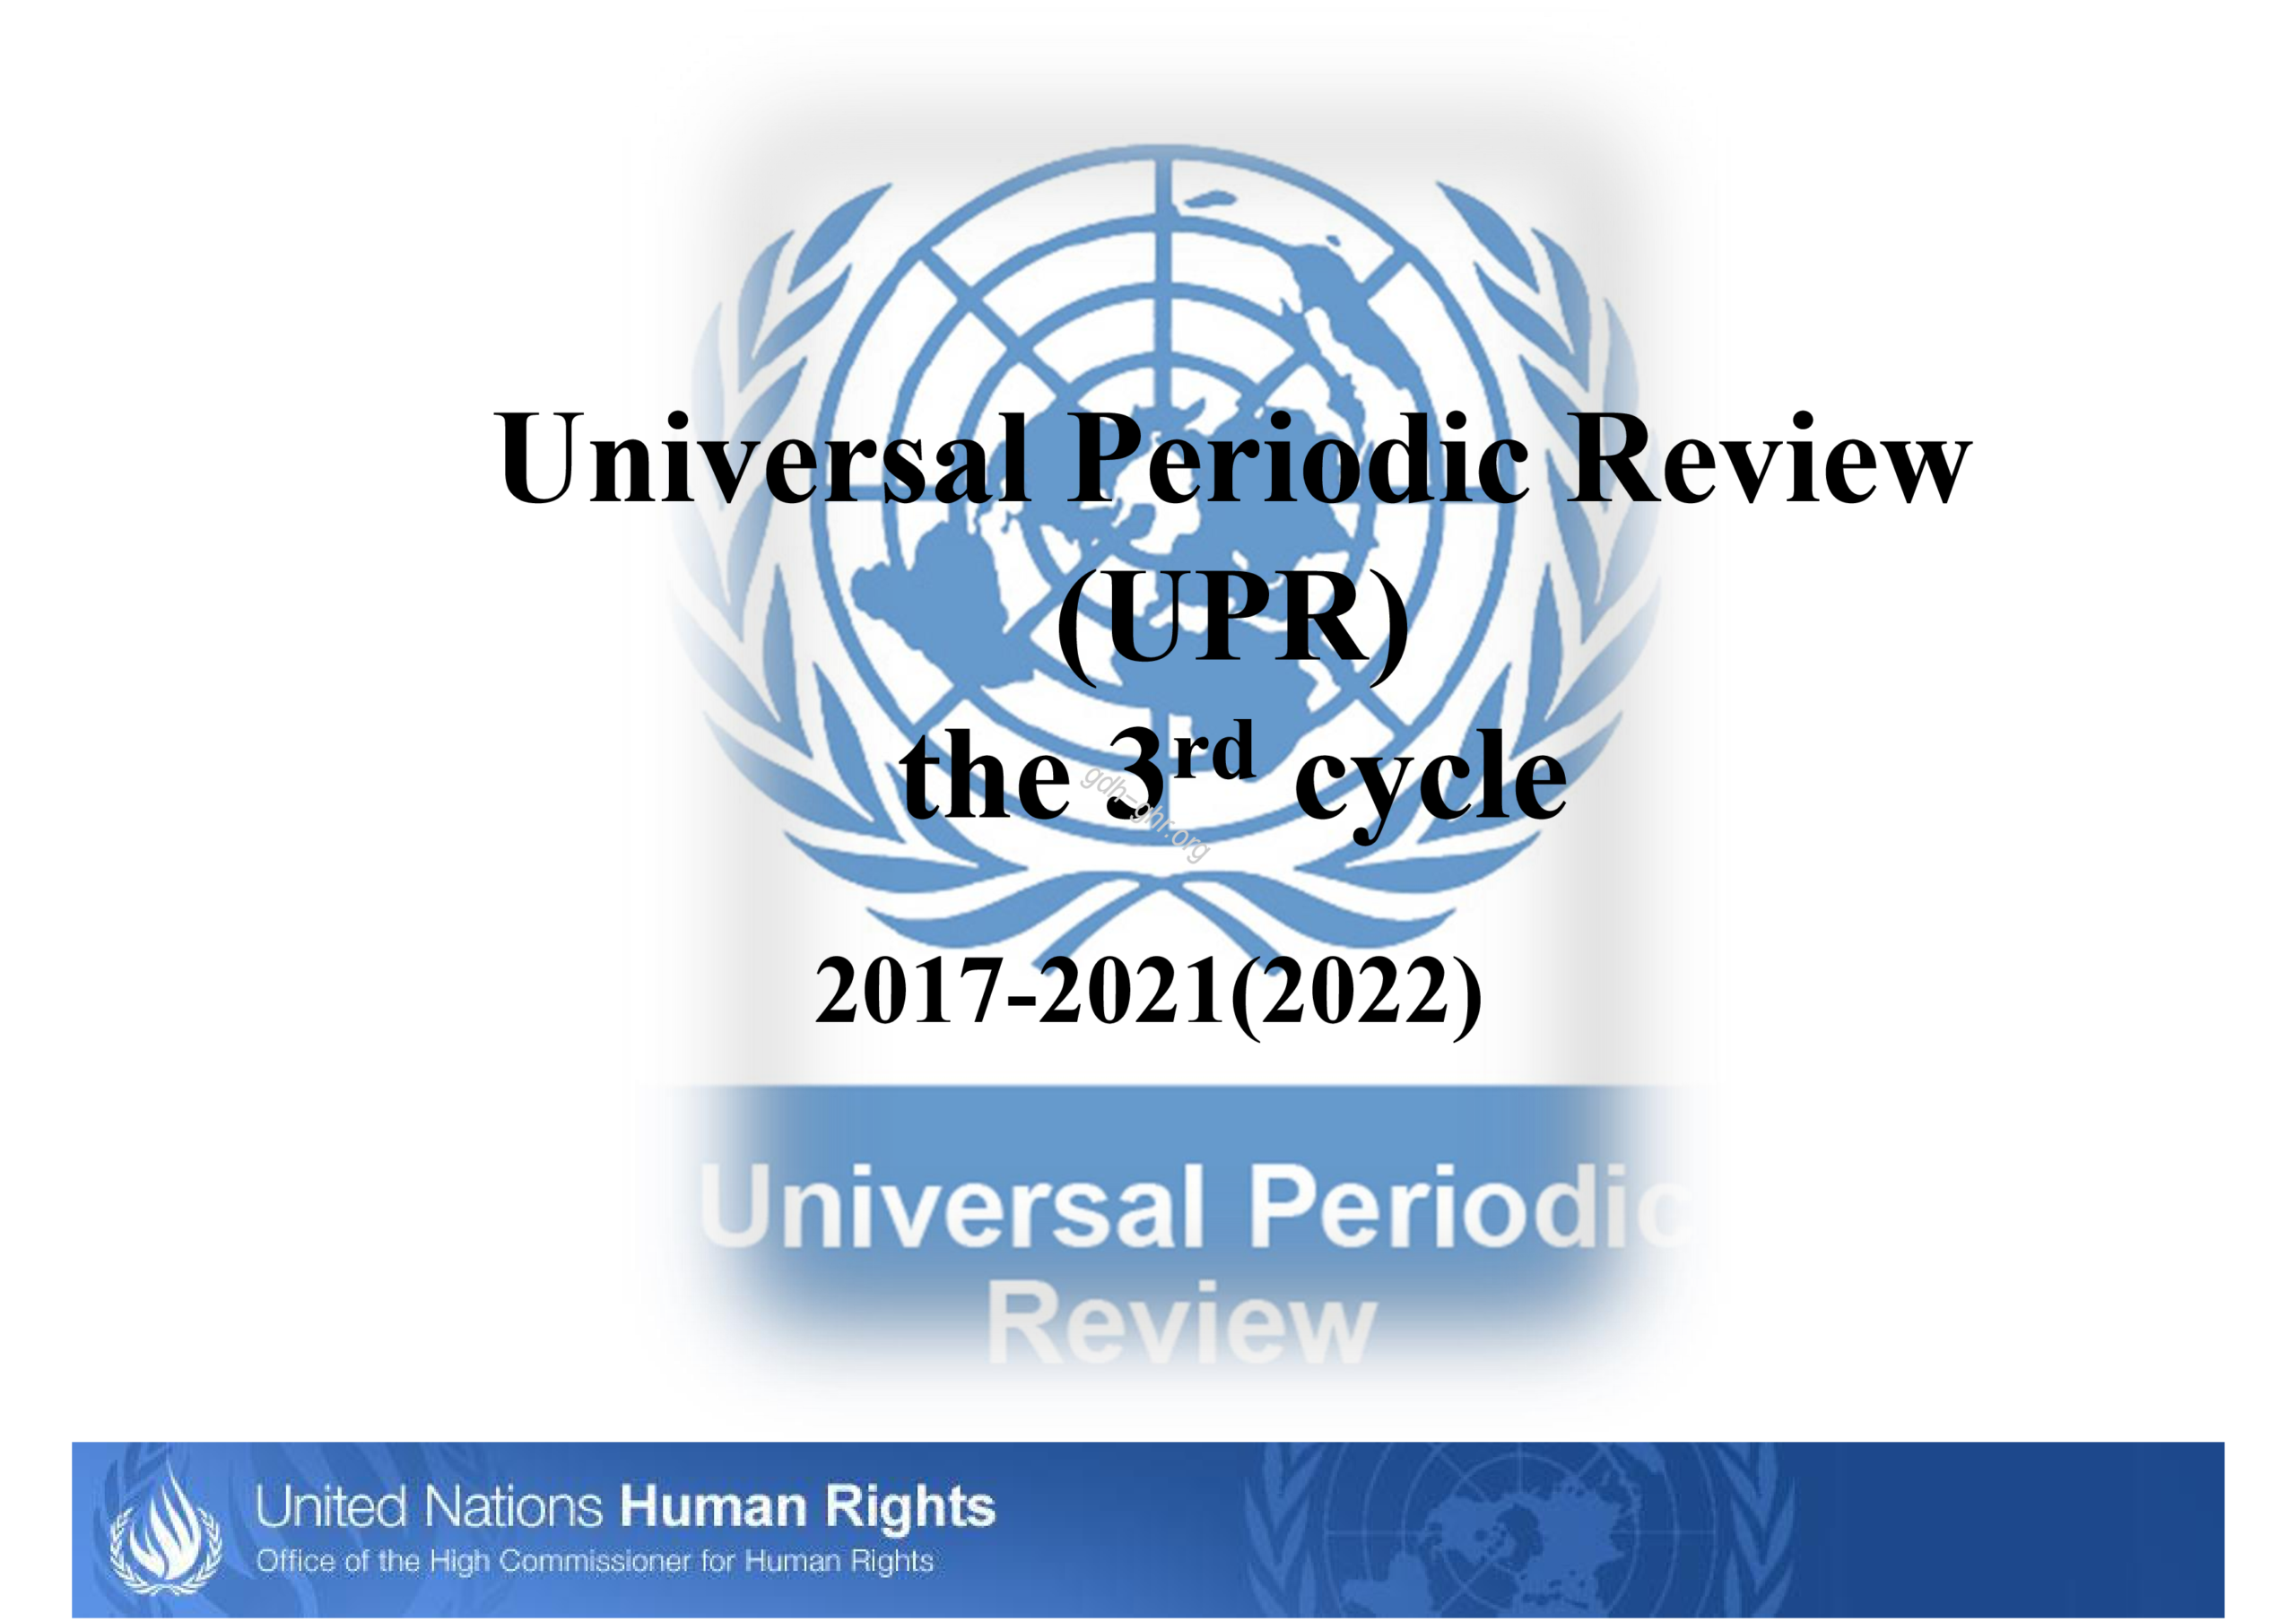 Universal Periodic Review UN HRC WG UPR Geneva for Human Rights